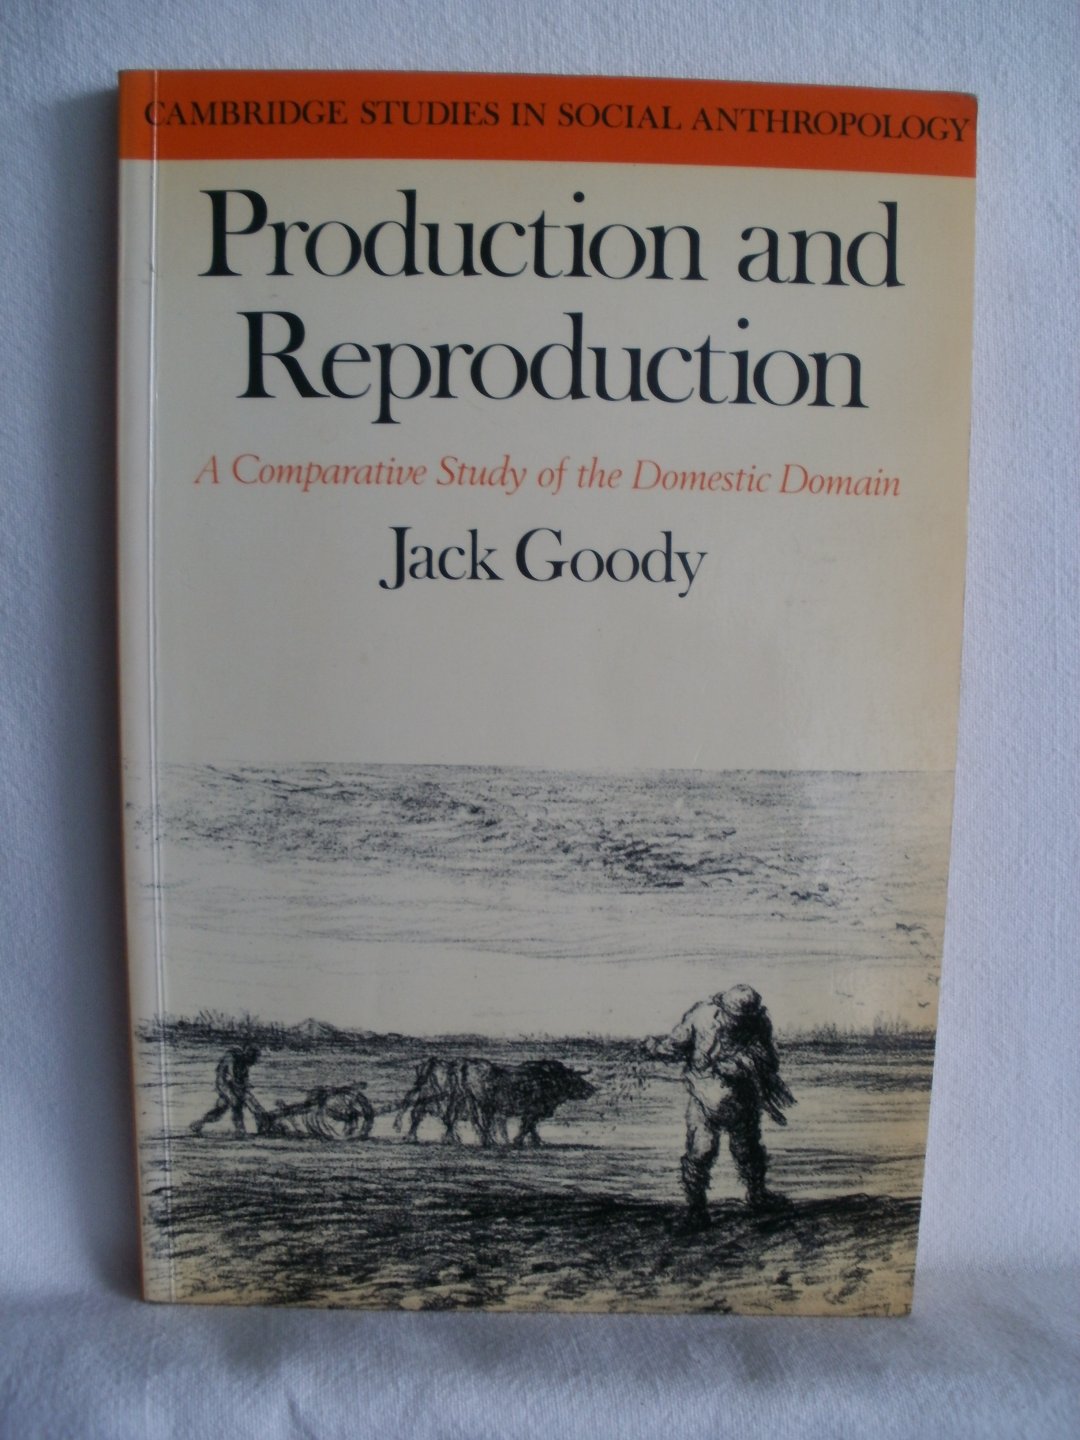 Goody, Jack - Production and reproduction. A Comparative Study of the Domestic Domain. Camebridge Studies in Social Anthropology no. 17